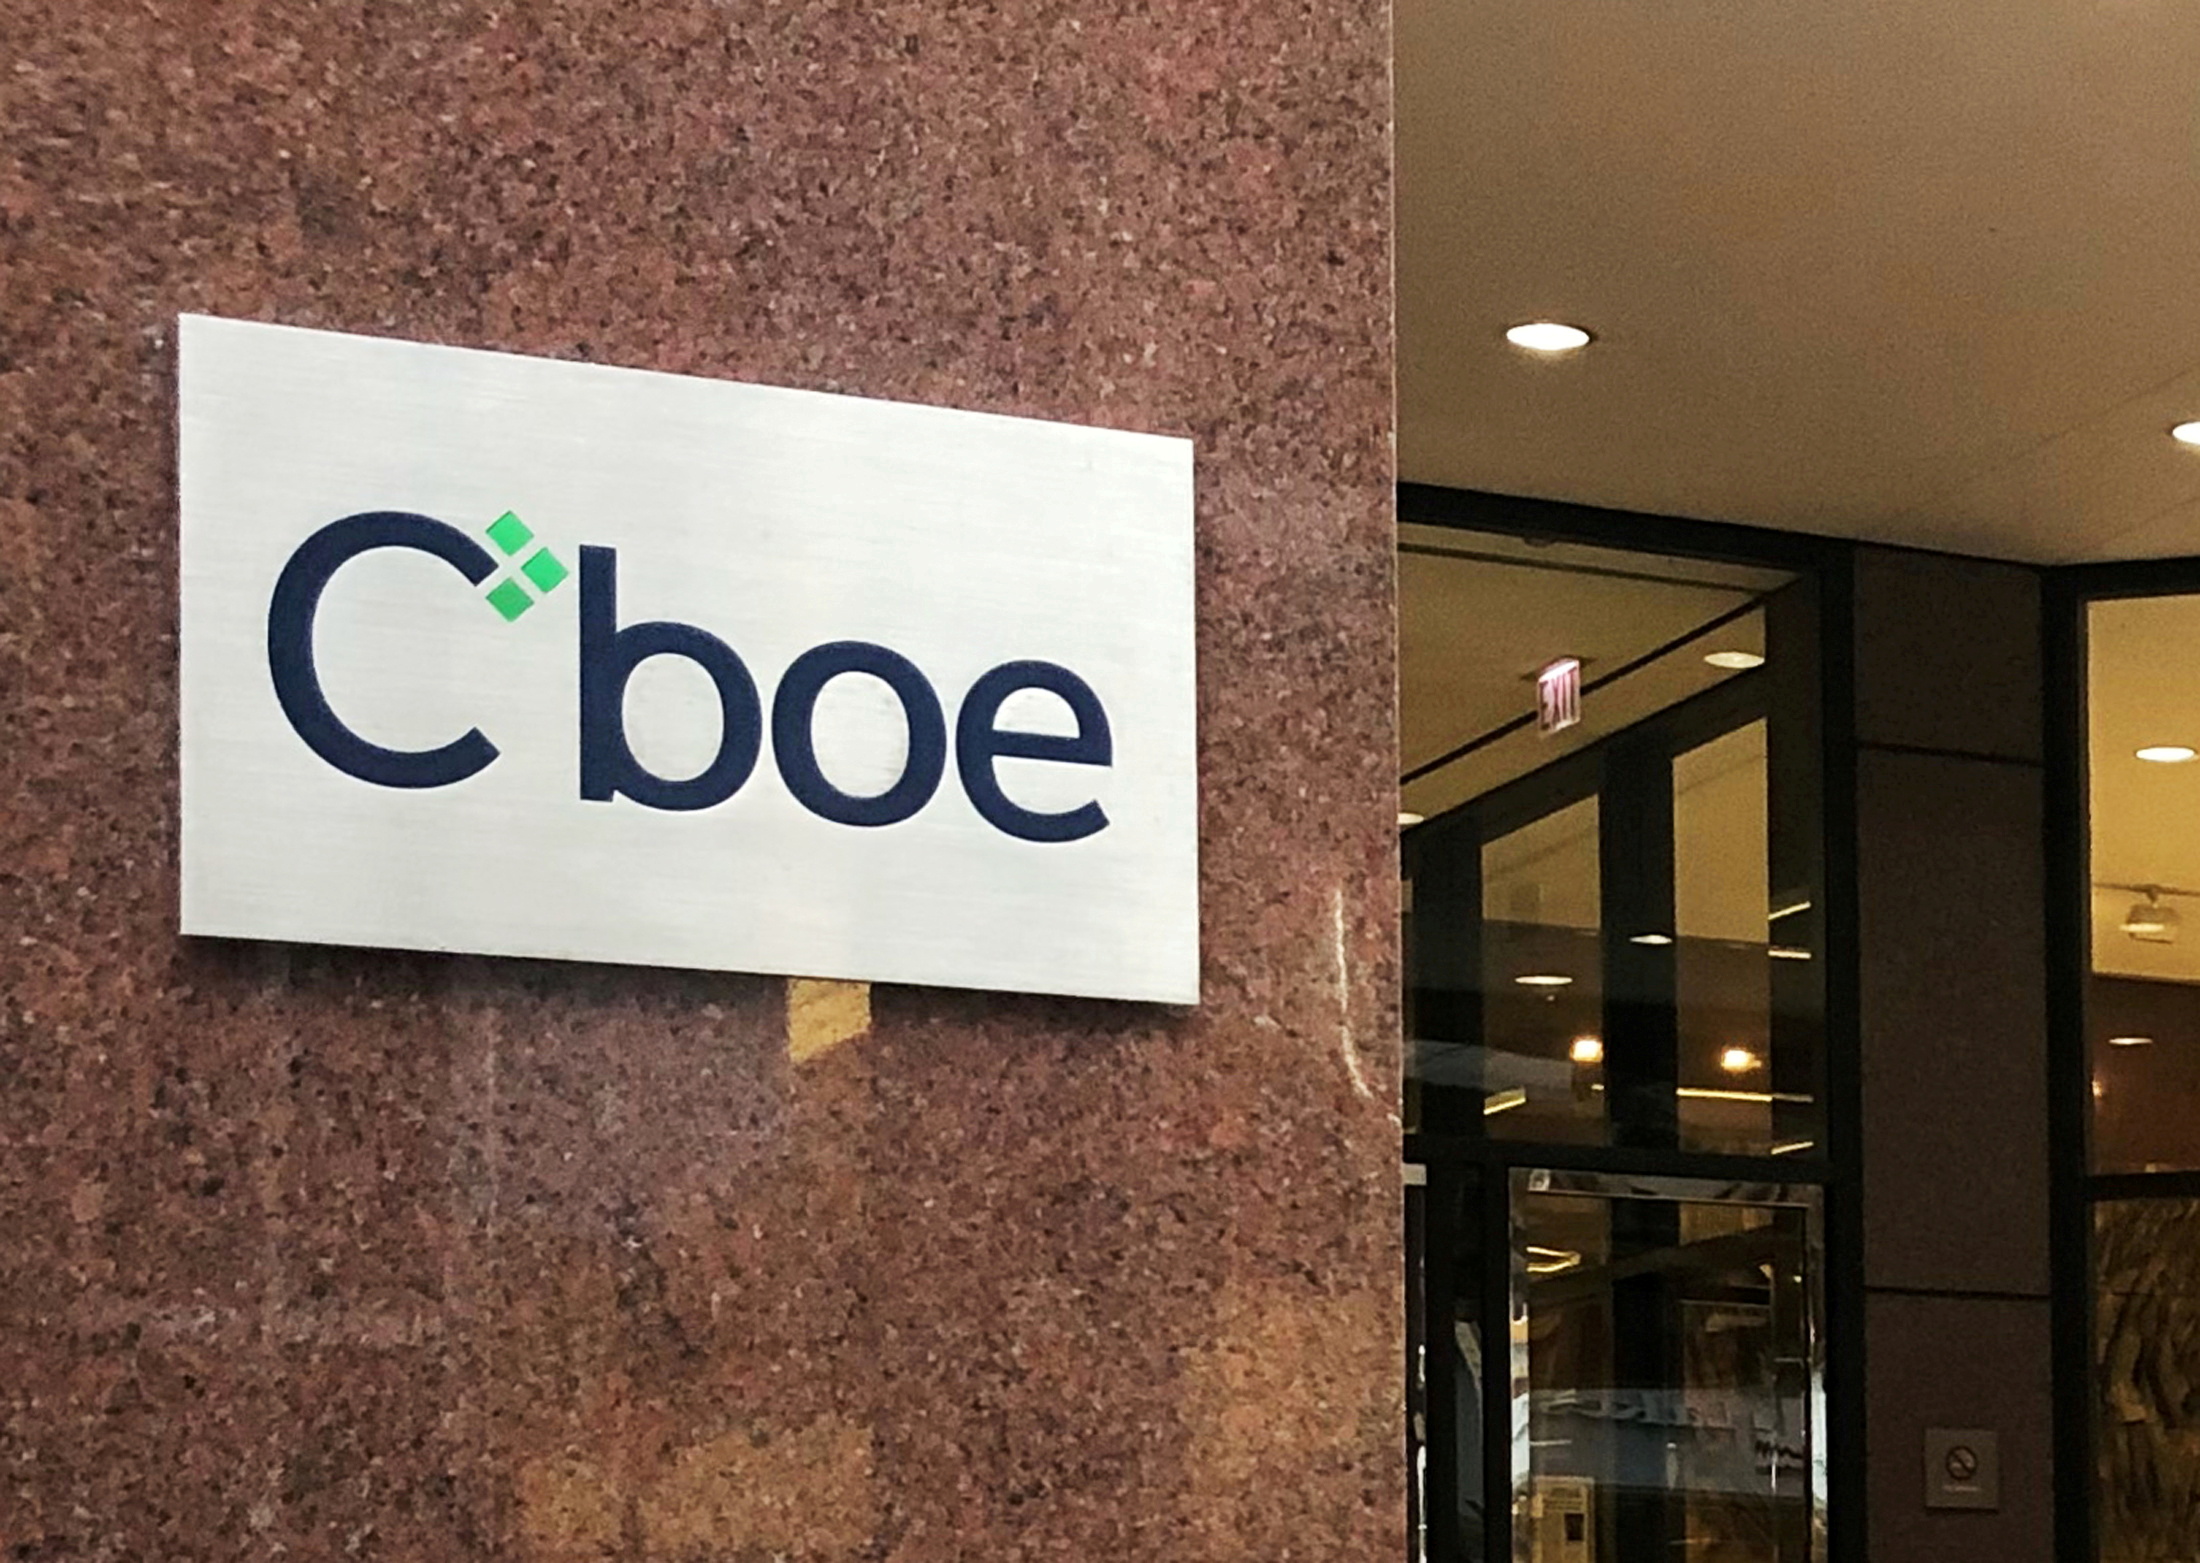 Chicago Board Options Exchange (CBOE) Global Markets sign hangs at its headquarters building in Chicago, Illinois, U.S., September 19, 2018. REUTERS/Michael Hirtzer